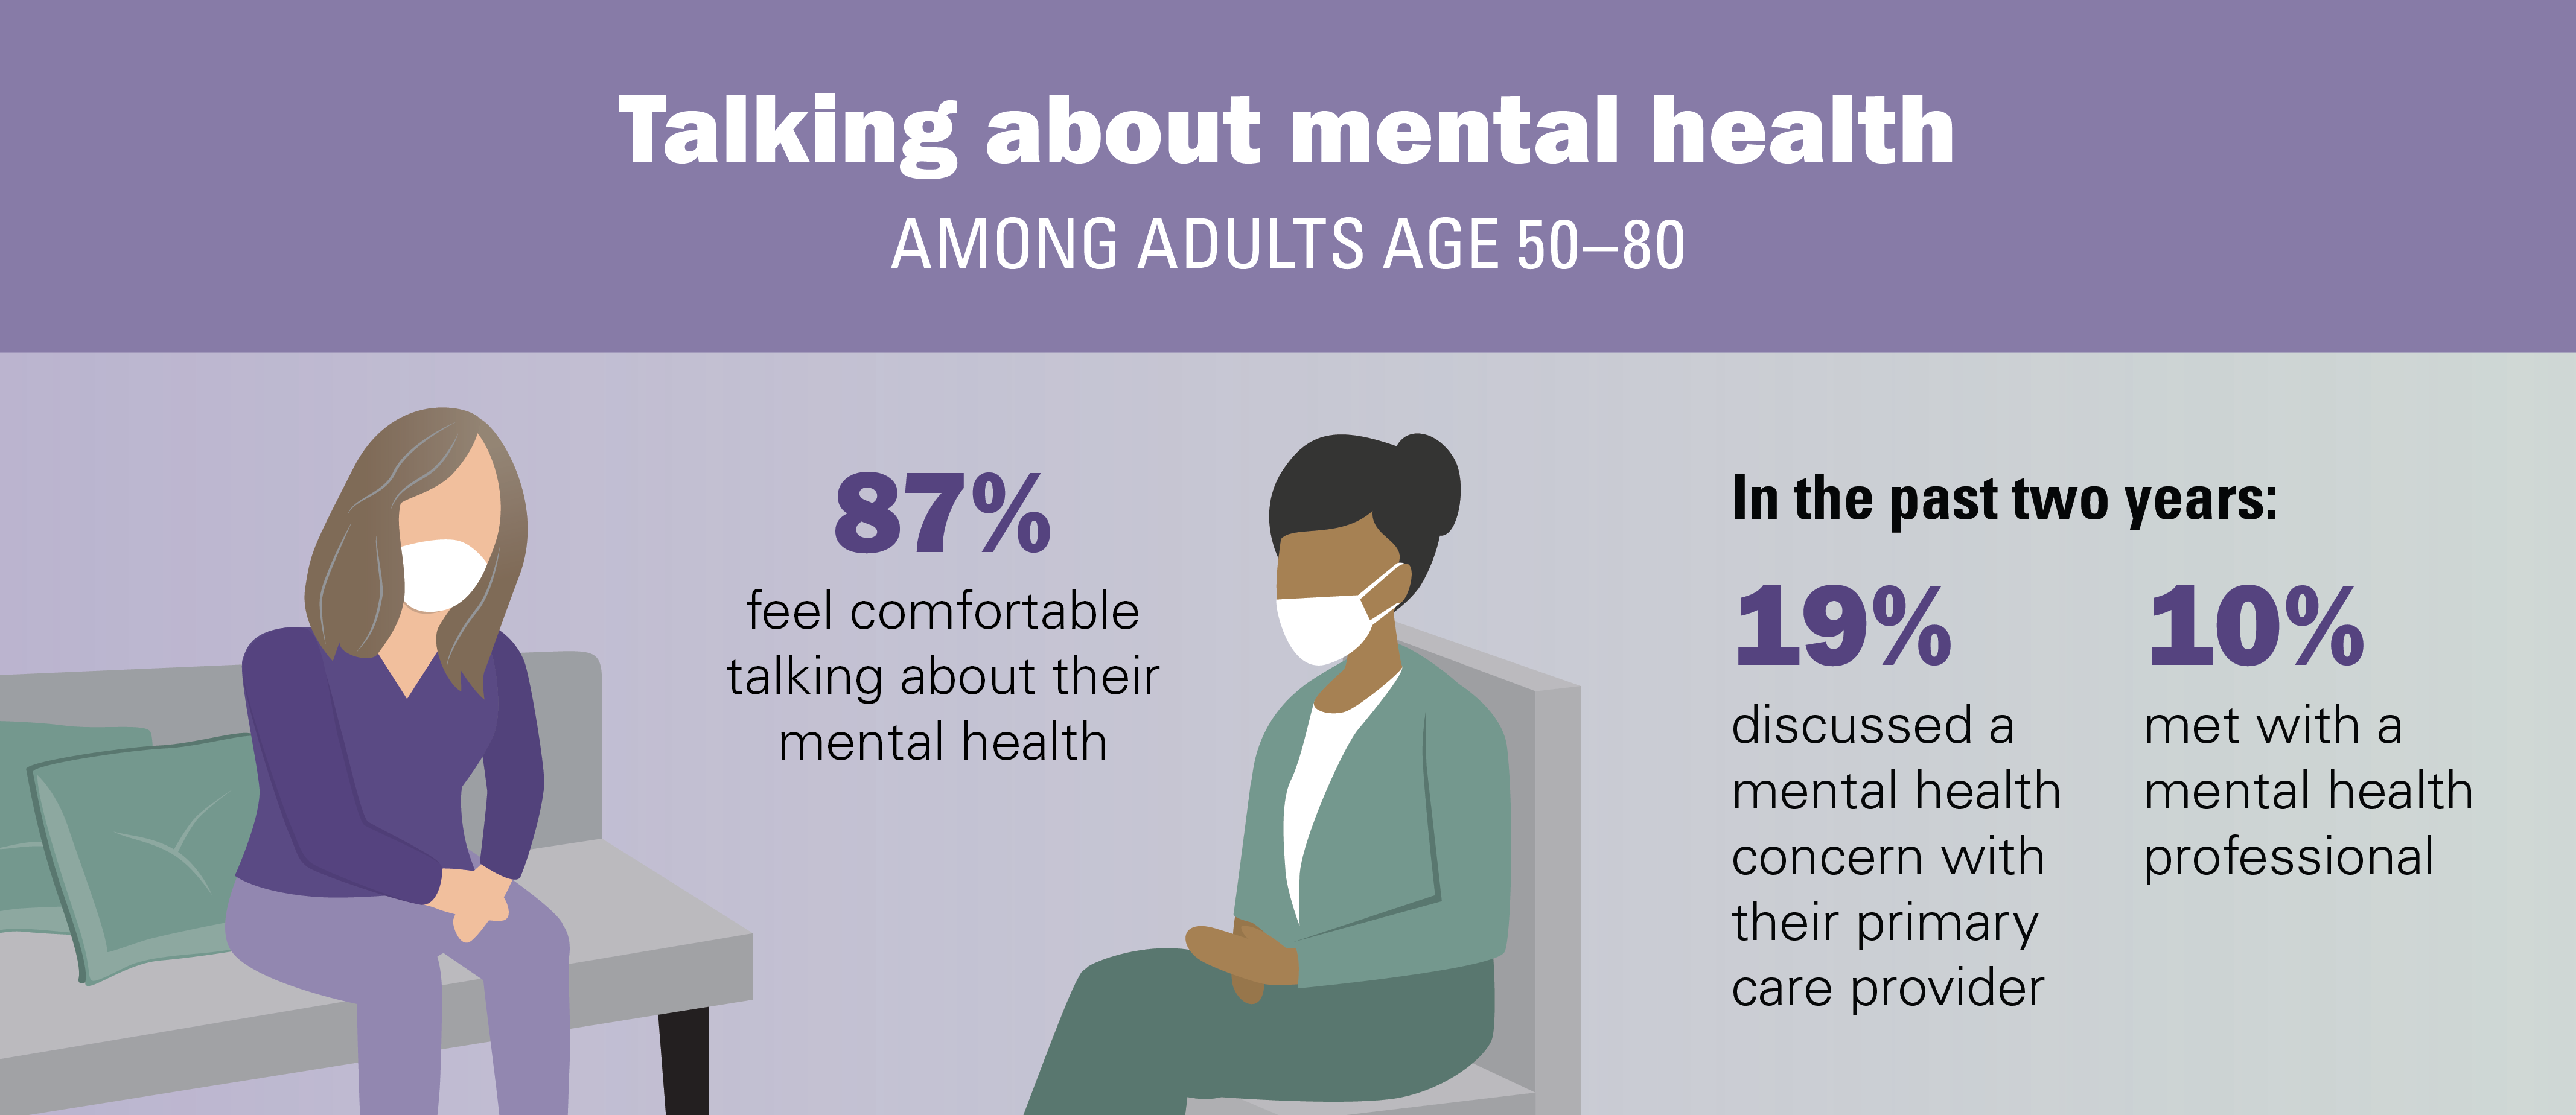 Talking about mental health among adults 50 -80 - 87% feel comfortable talking about their mental health